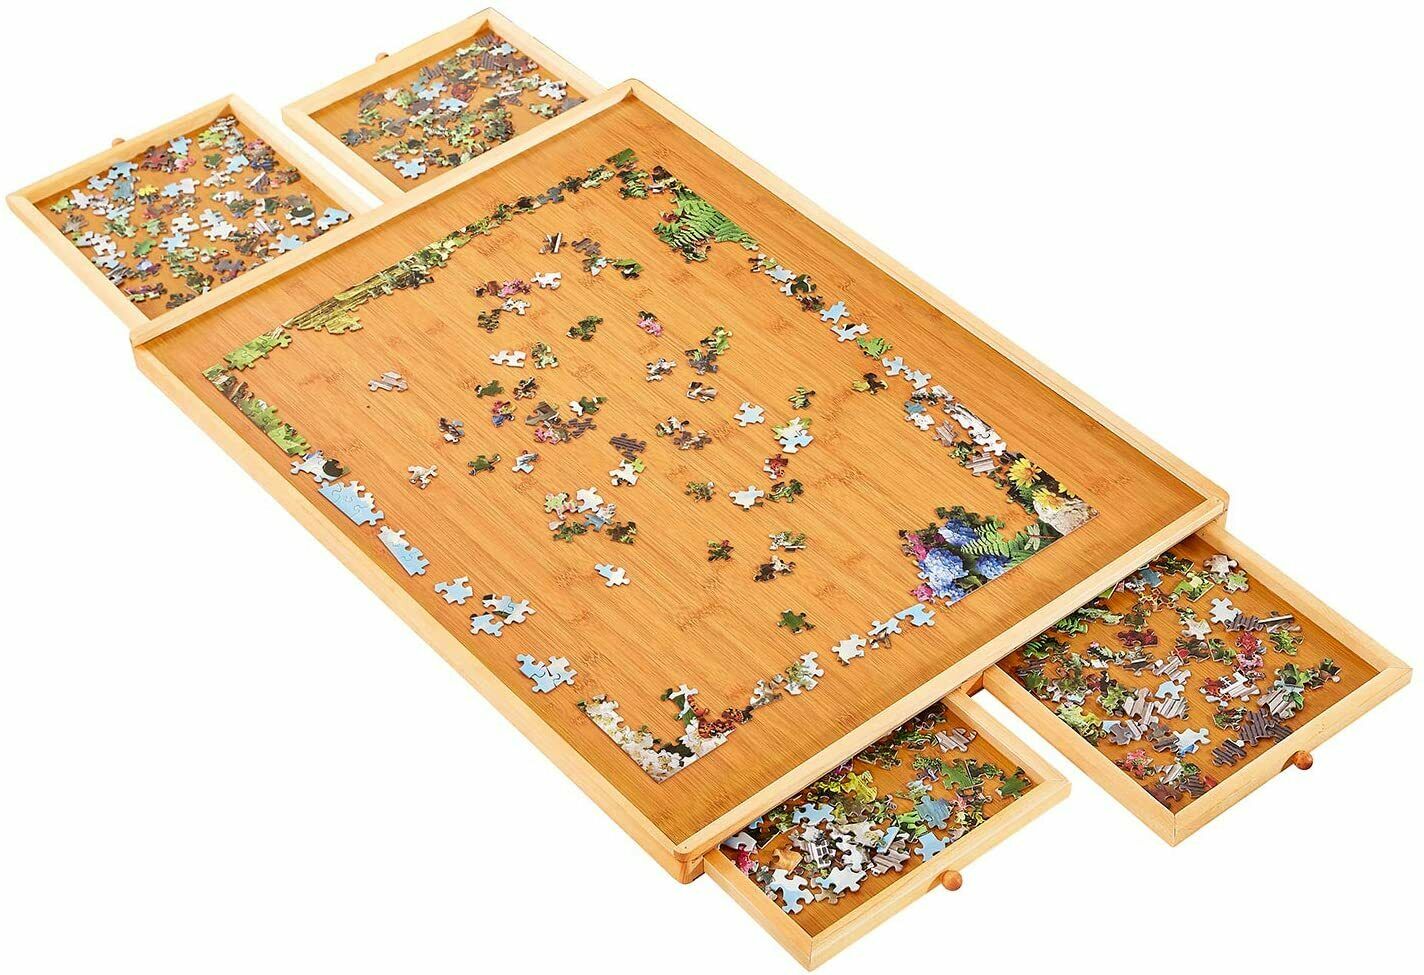 29" Standard Puzzle Board Jigsaw Table For Maximum 1000pcs Puzzles Bamboo Finish